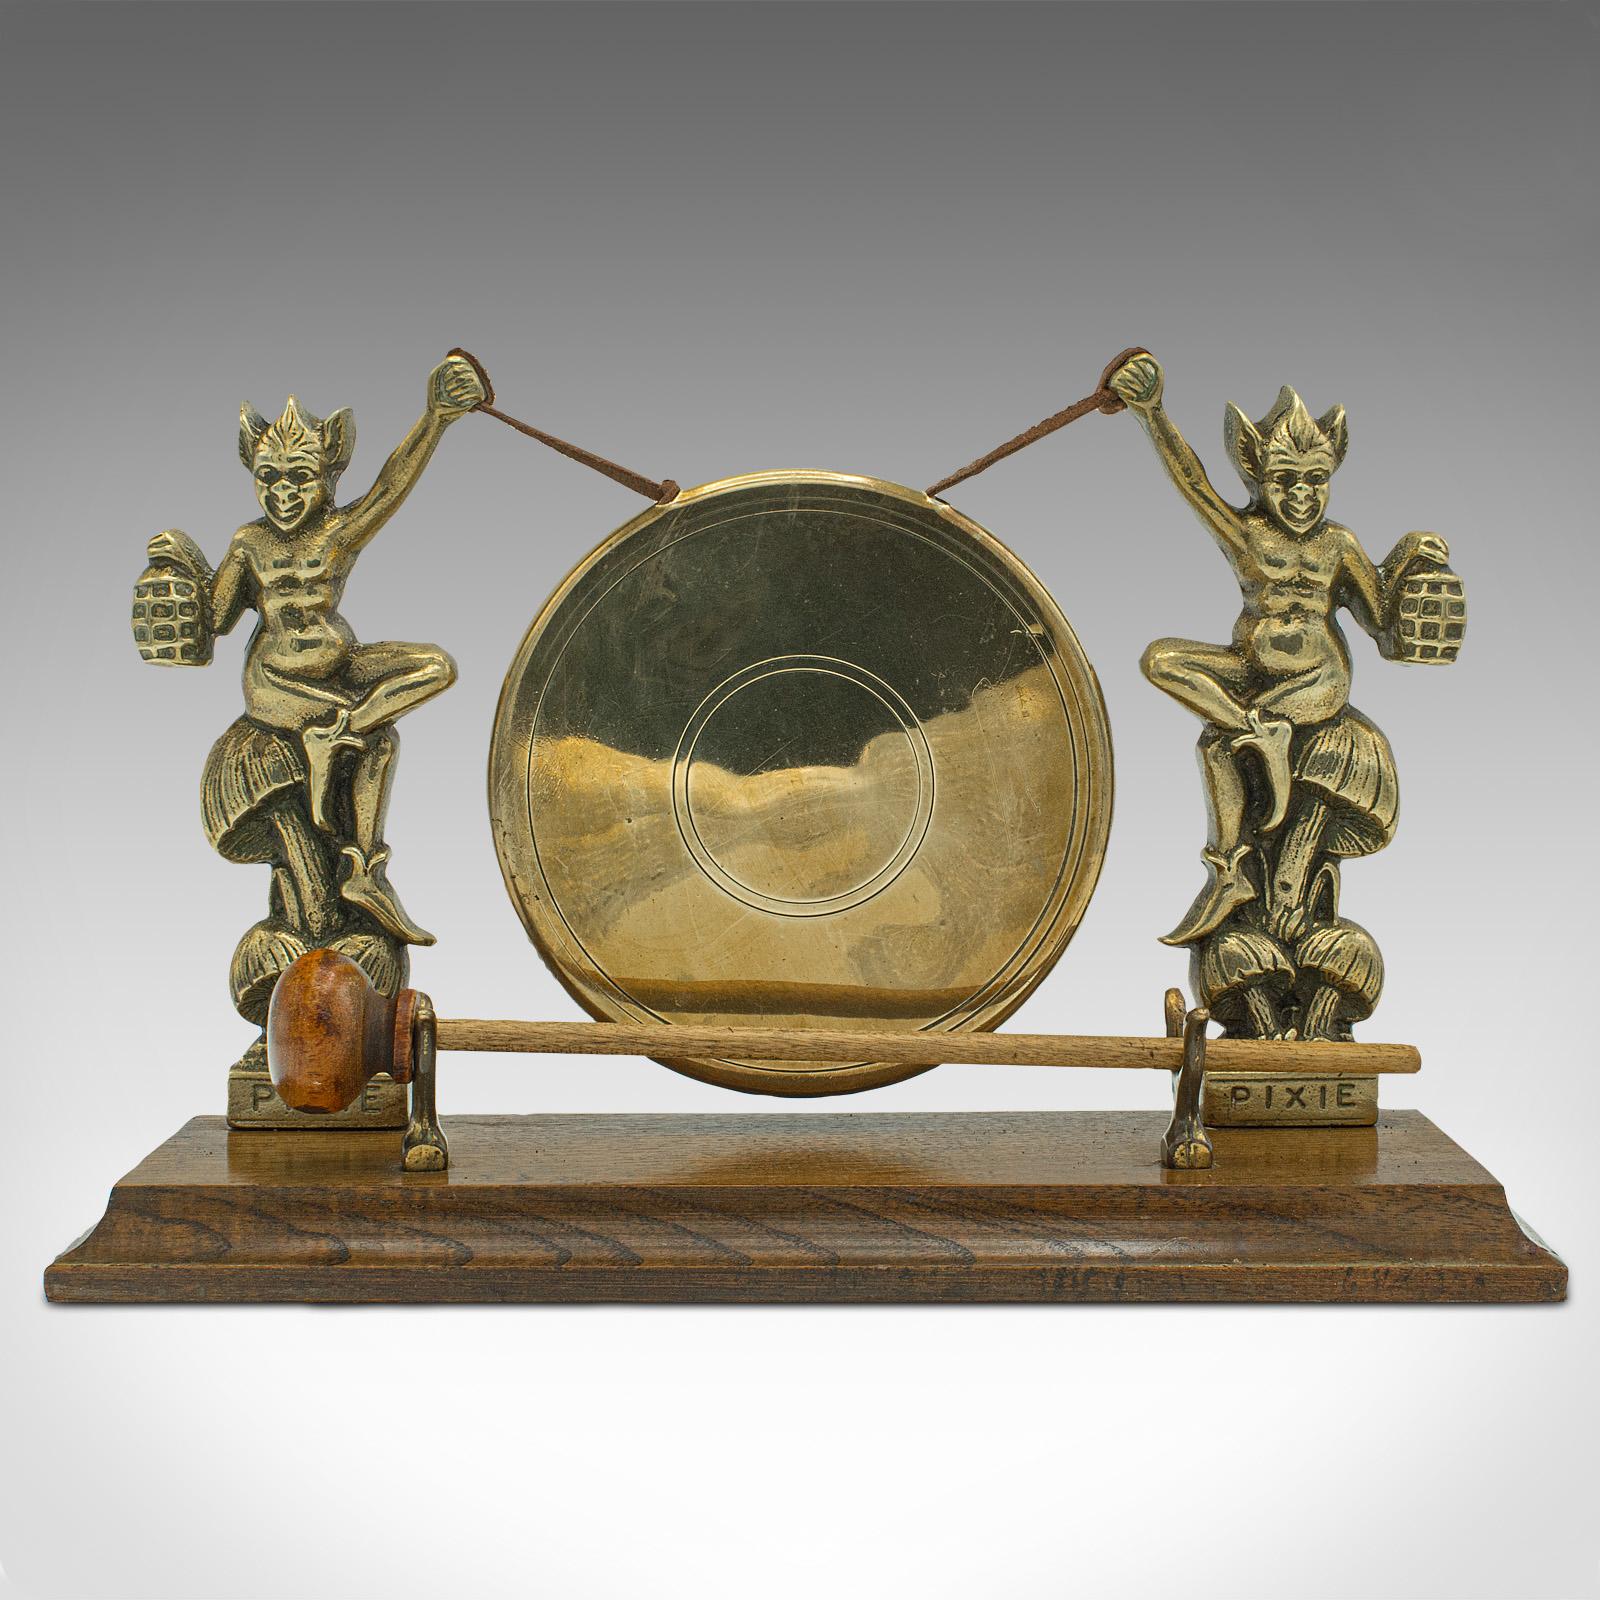 This is an antique Cornish Pixie gong. An English, brass and oak dinner chime, dating to the late Victorian period, circa 1900.

Charming gong raised by iconic Cornish Pixie figures
Displays a desirable aged patina and in good order
Polished